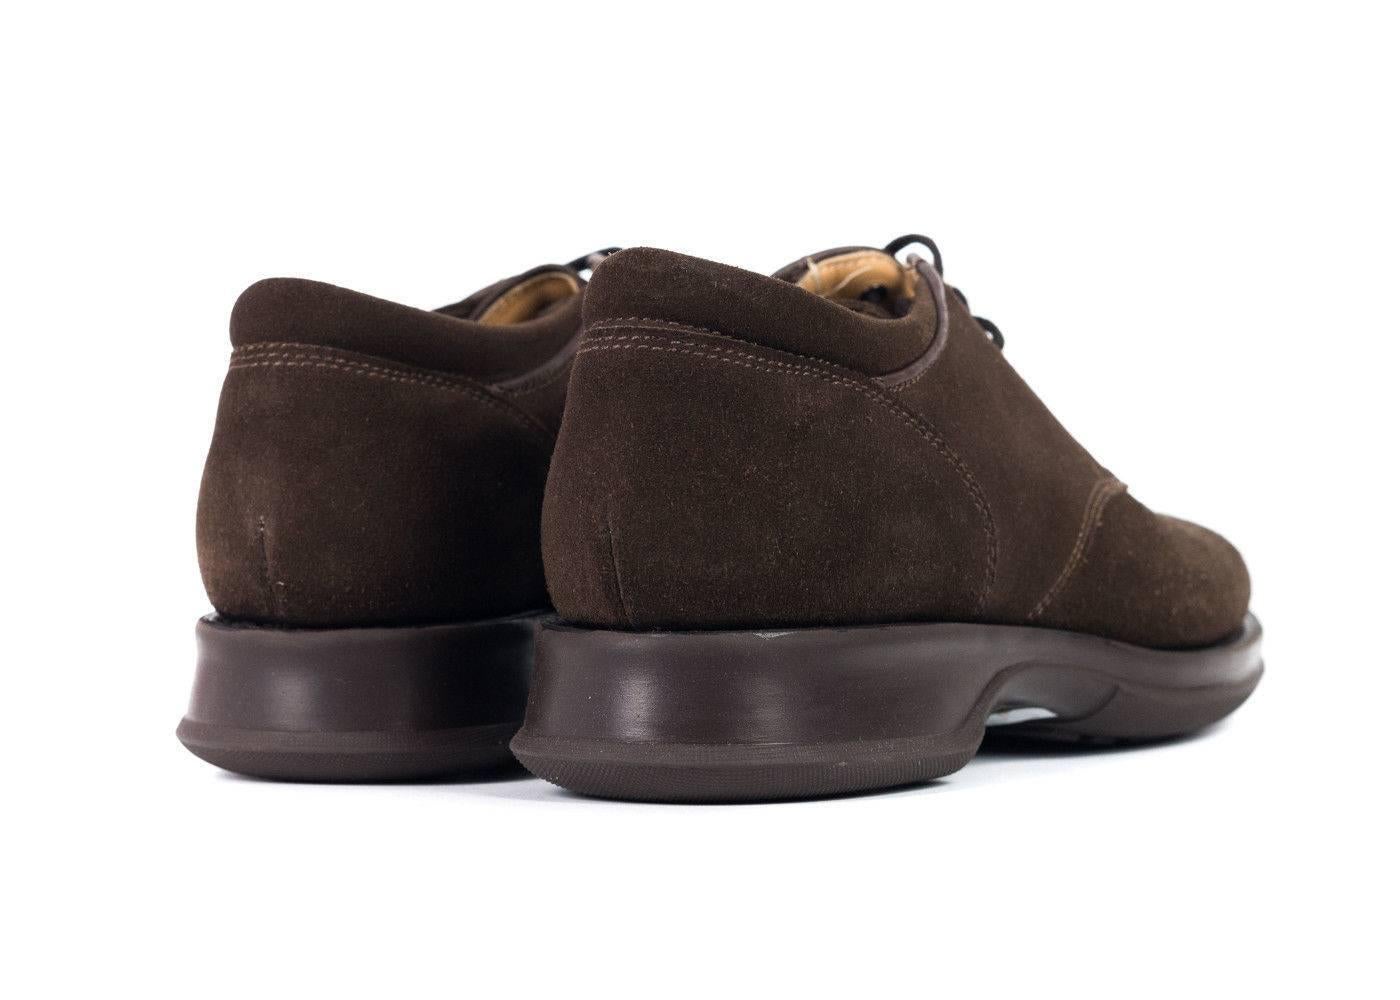 Church's lace up shoes in a gorgeous chocolate brown leather. These derby shoes are perfect for professional occasions or worn as a trendy casual look. Pair it with a pair of culottes or black jeans with a striped button down or feminine blouse for